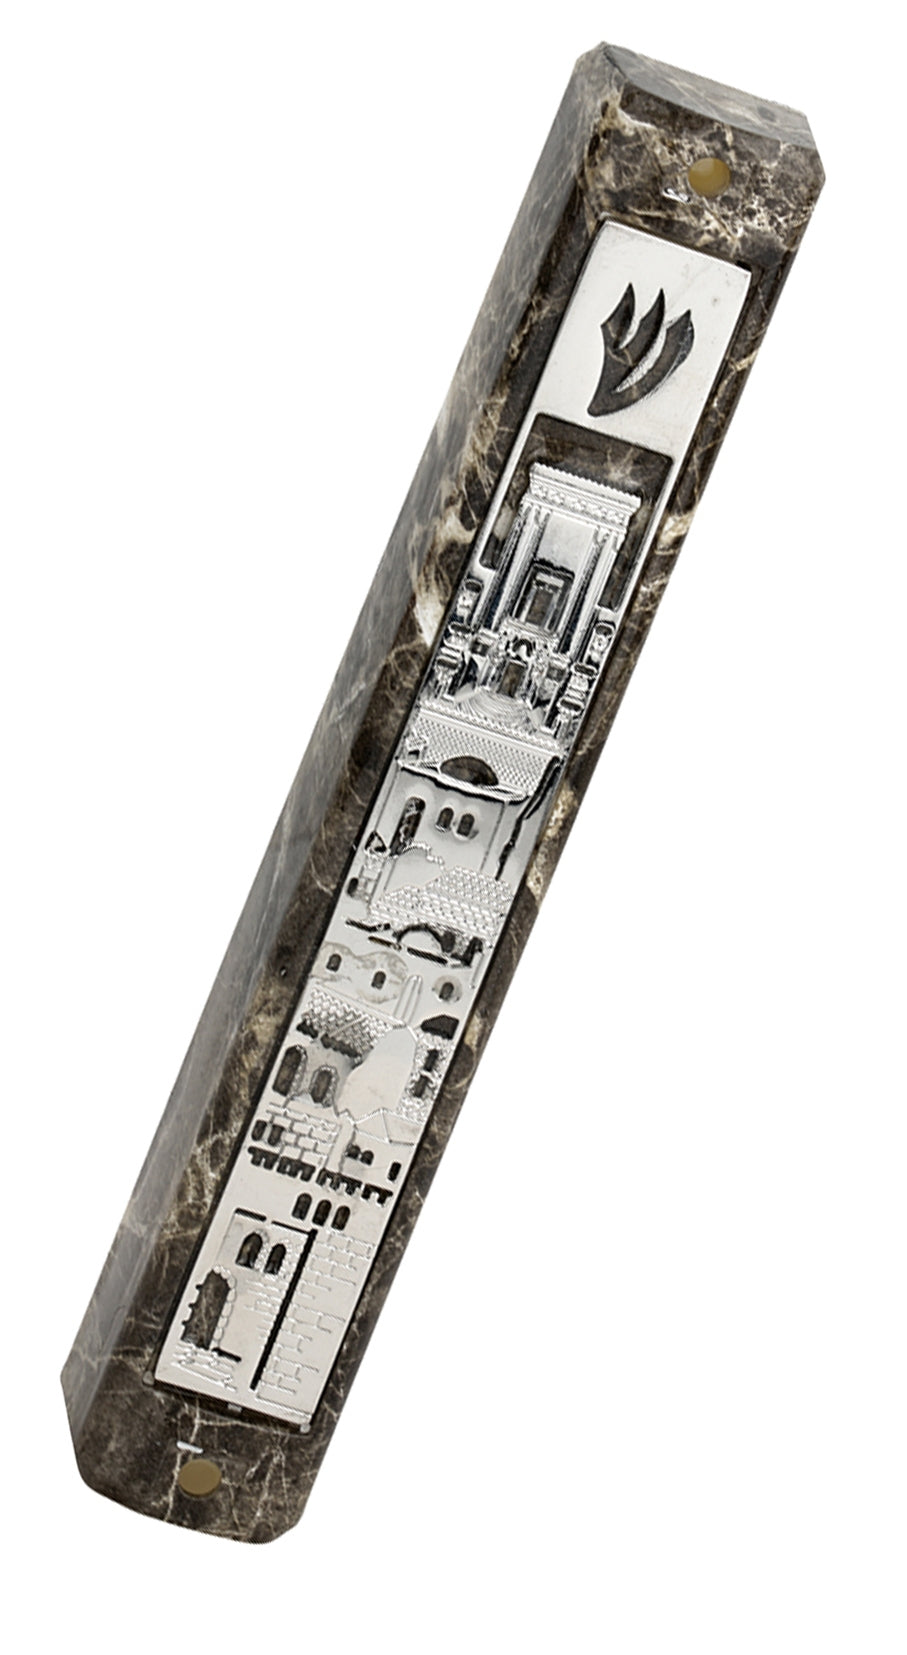 Marble Mezuzah Case with Image of Jerasulem on Plate